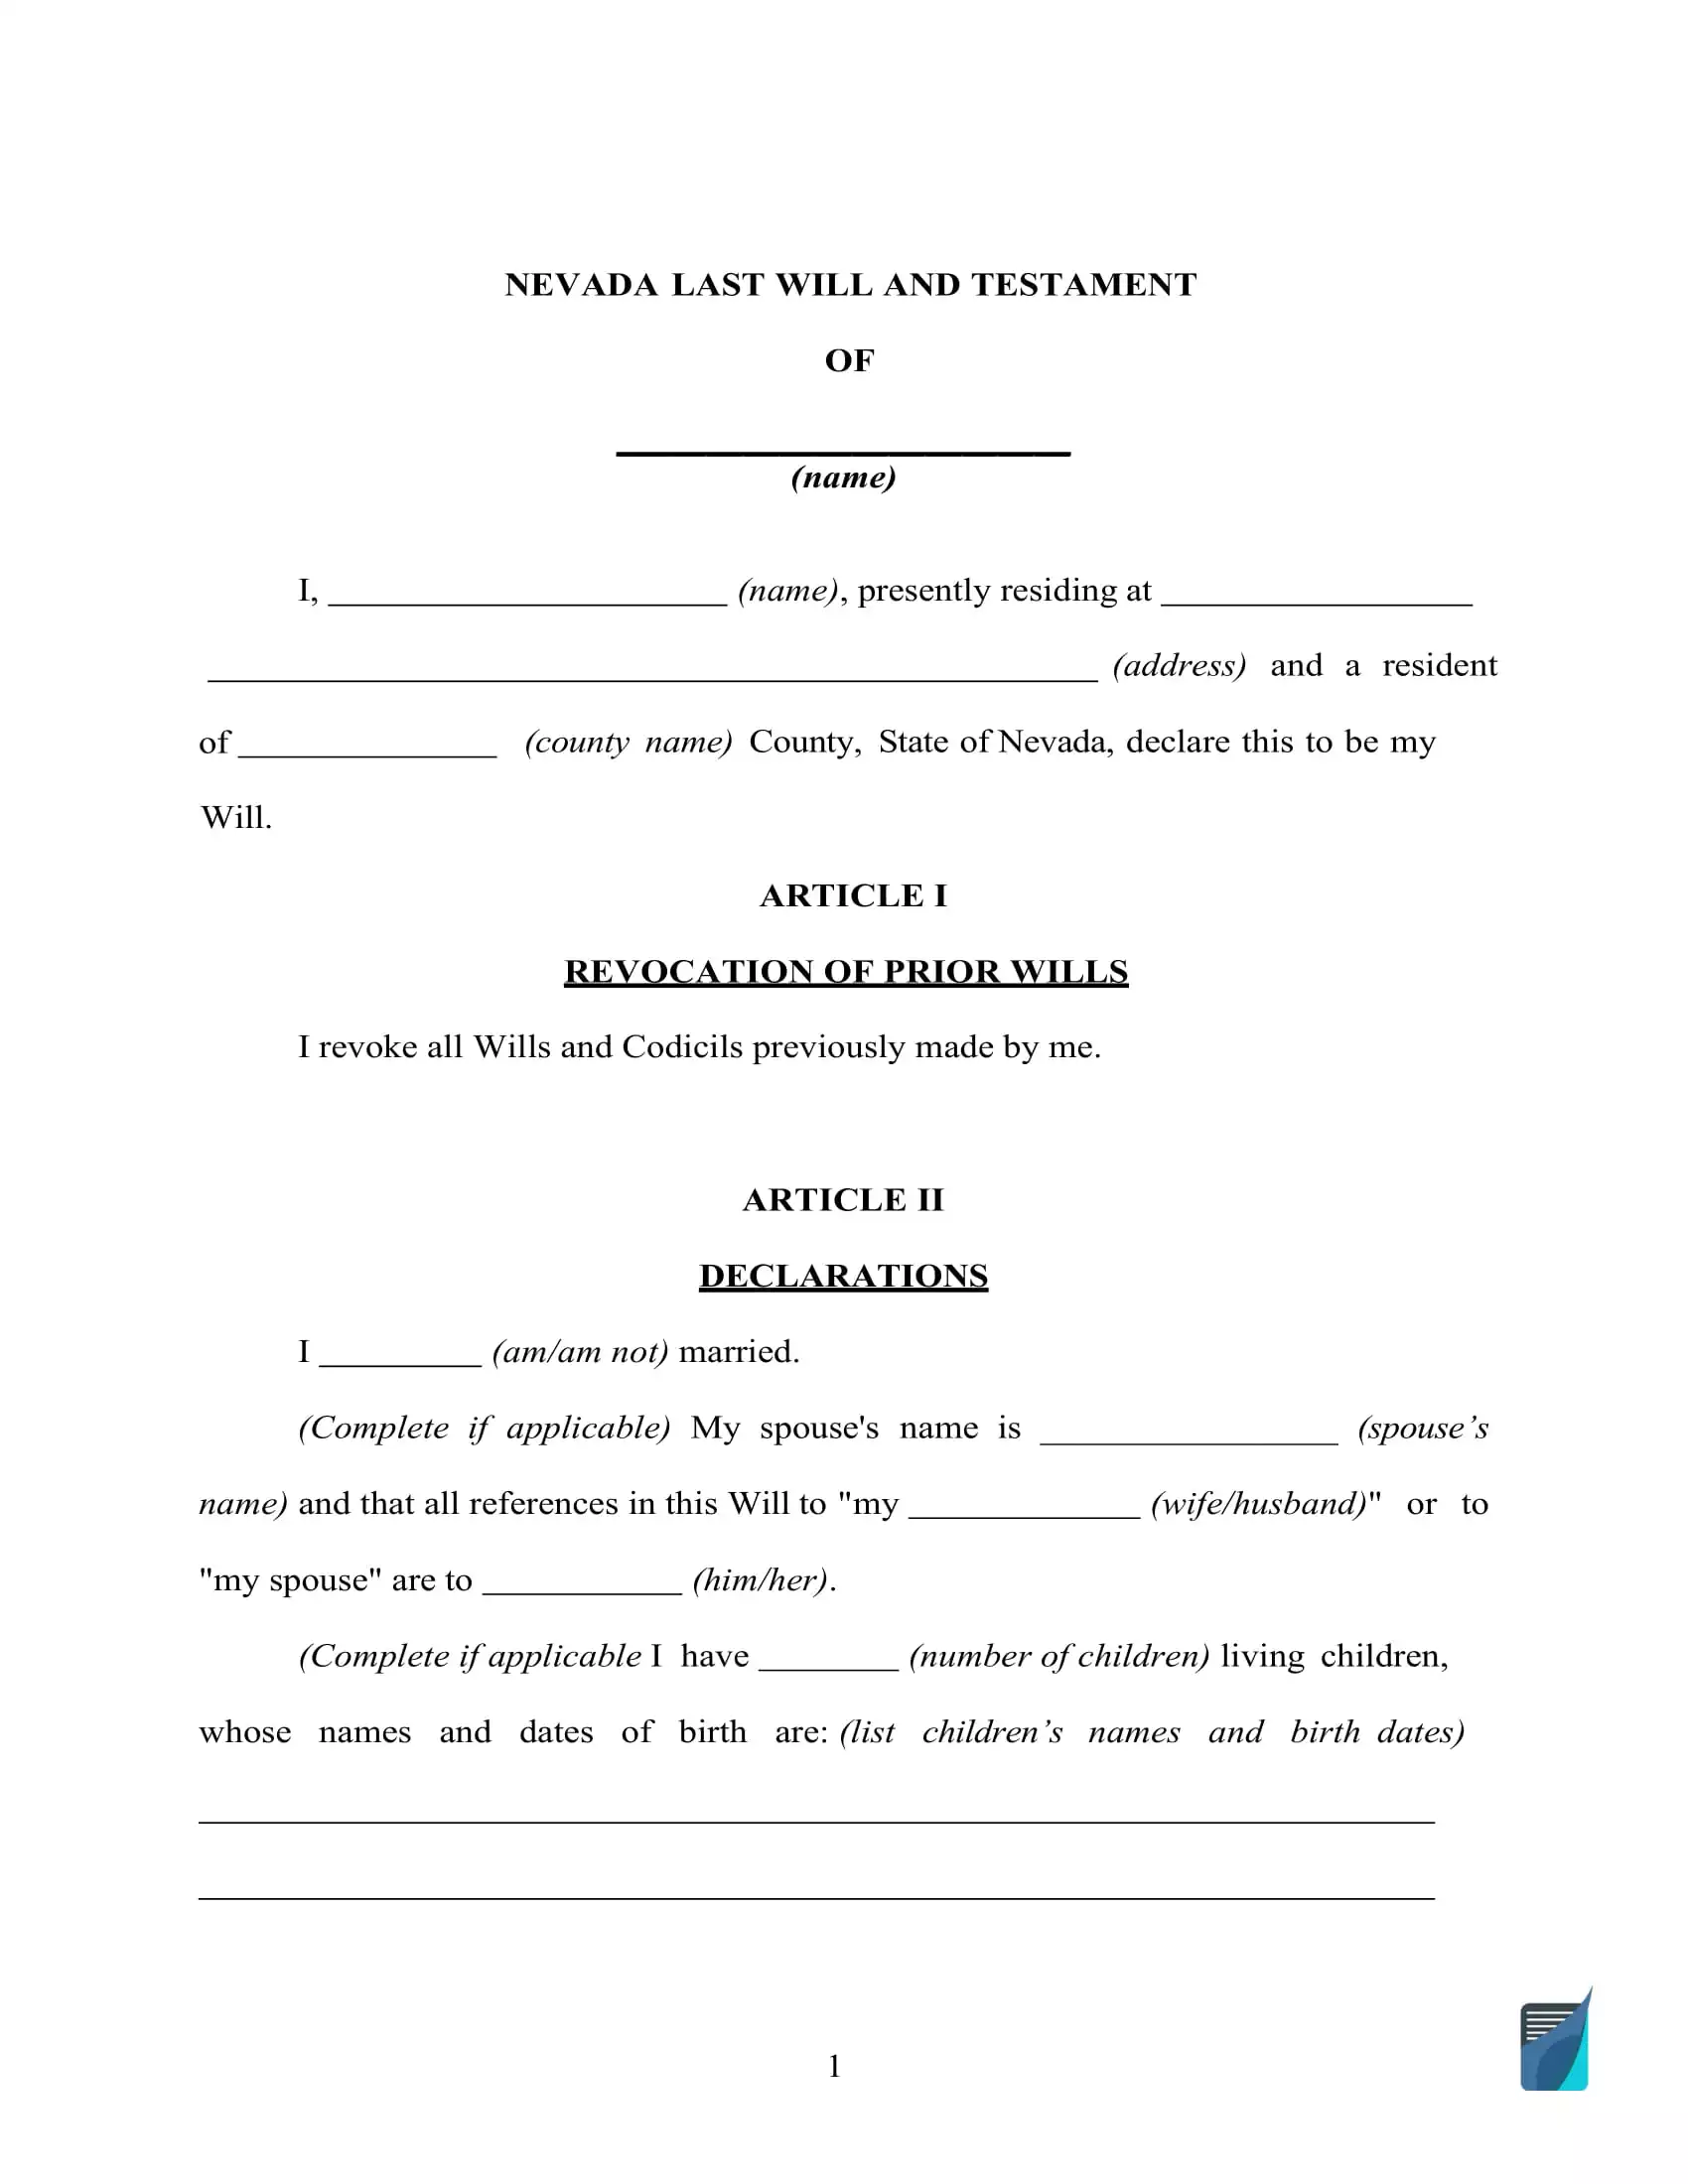 nevada-last-will-and-testament-template